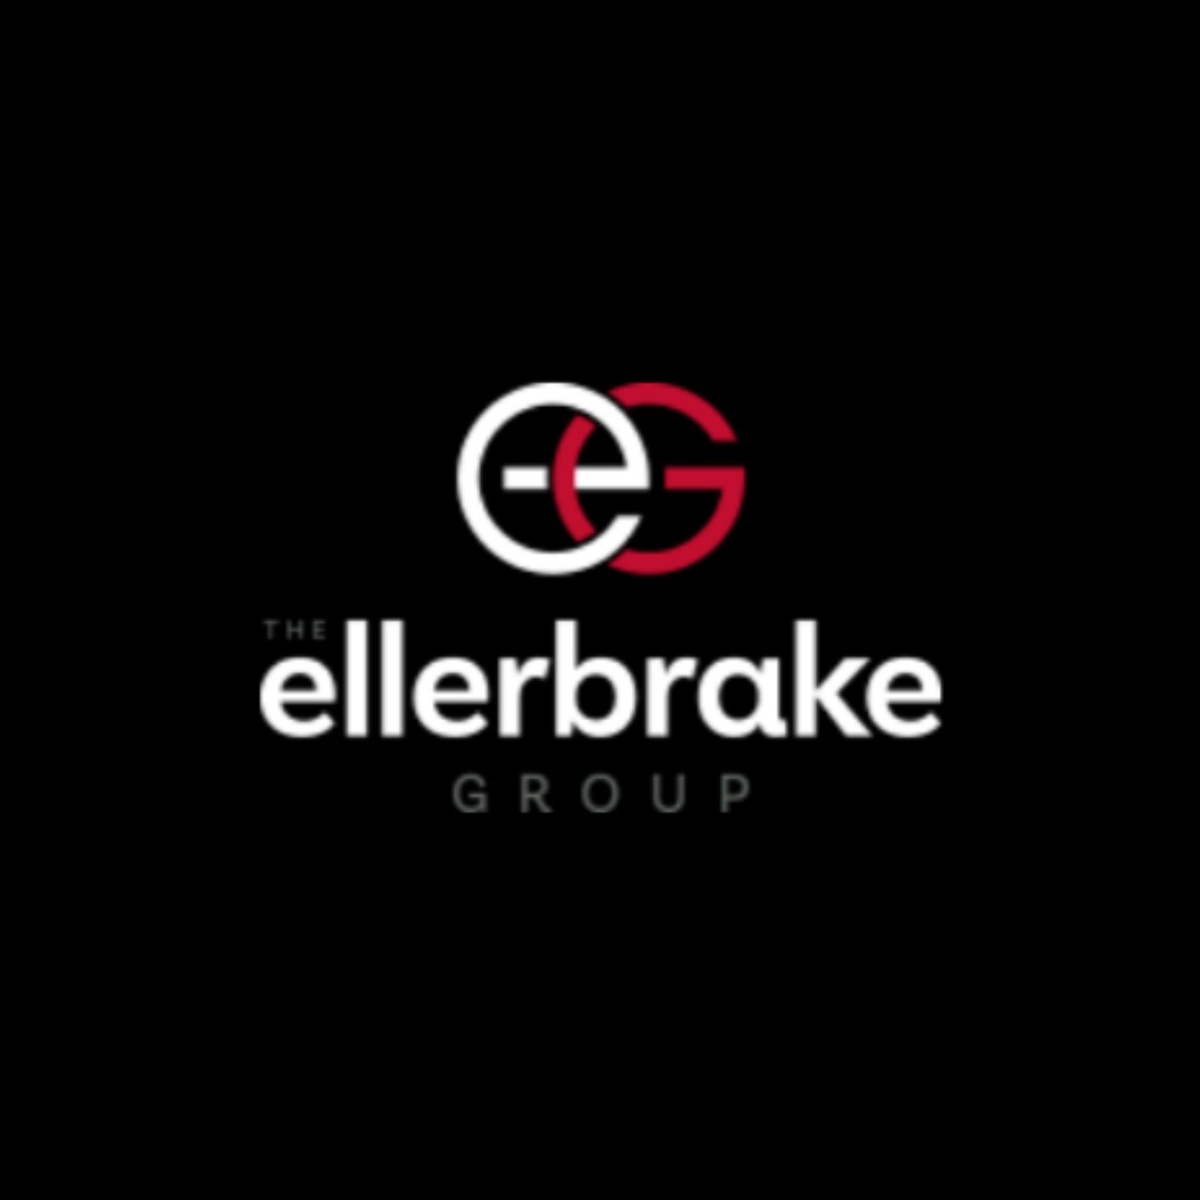 Your Guide to Finding Your Perfect Home with Ellerbrake, the Premier Realtor in O’Fallon, IL